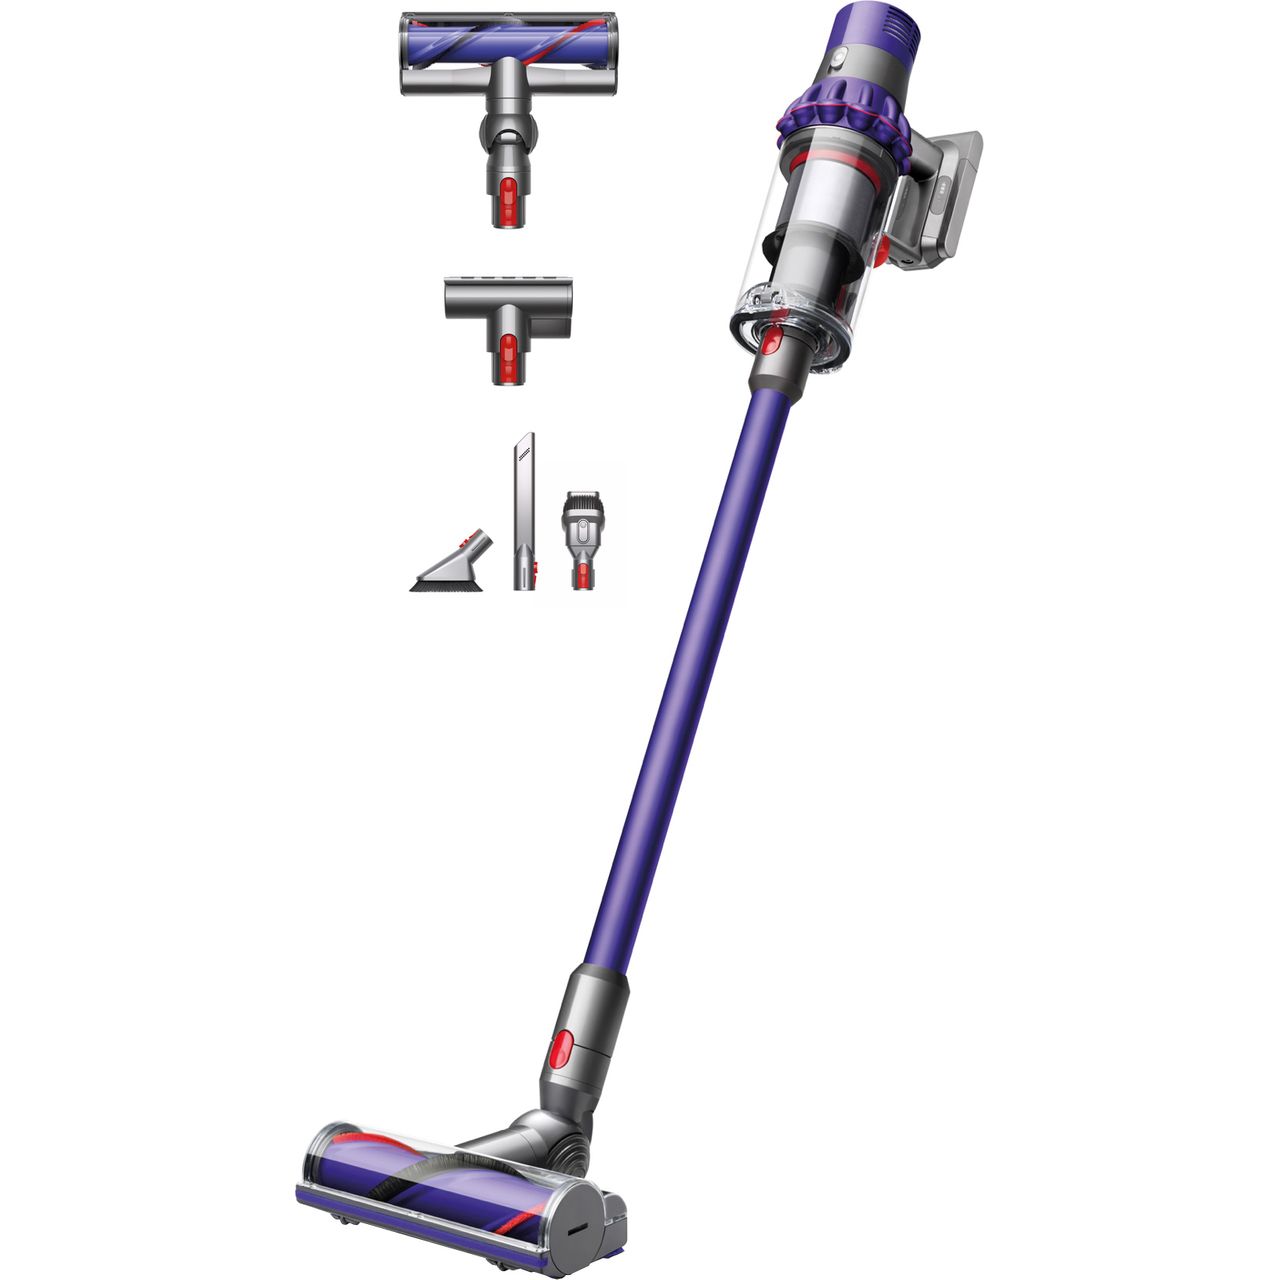 Dyson Cyclone V10 Animal Cordless Vacuum Cleaner with up to 60 Minutes Run Time Review